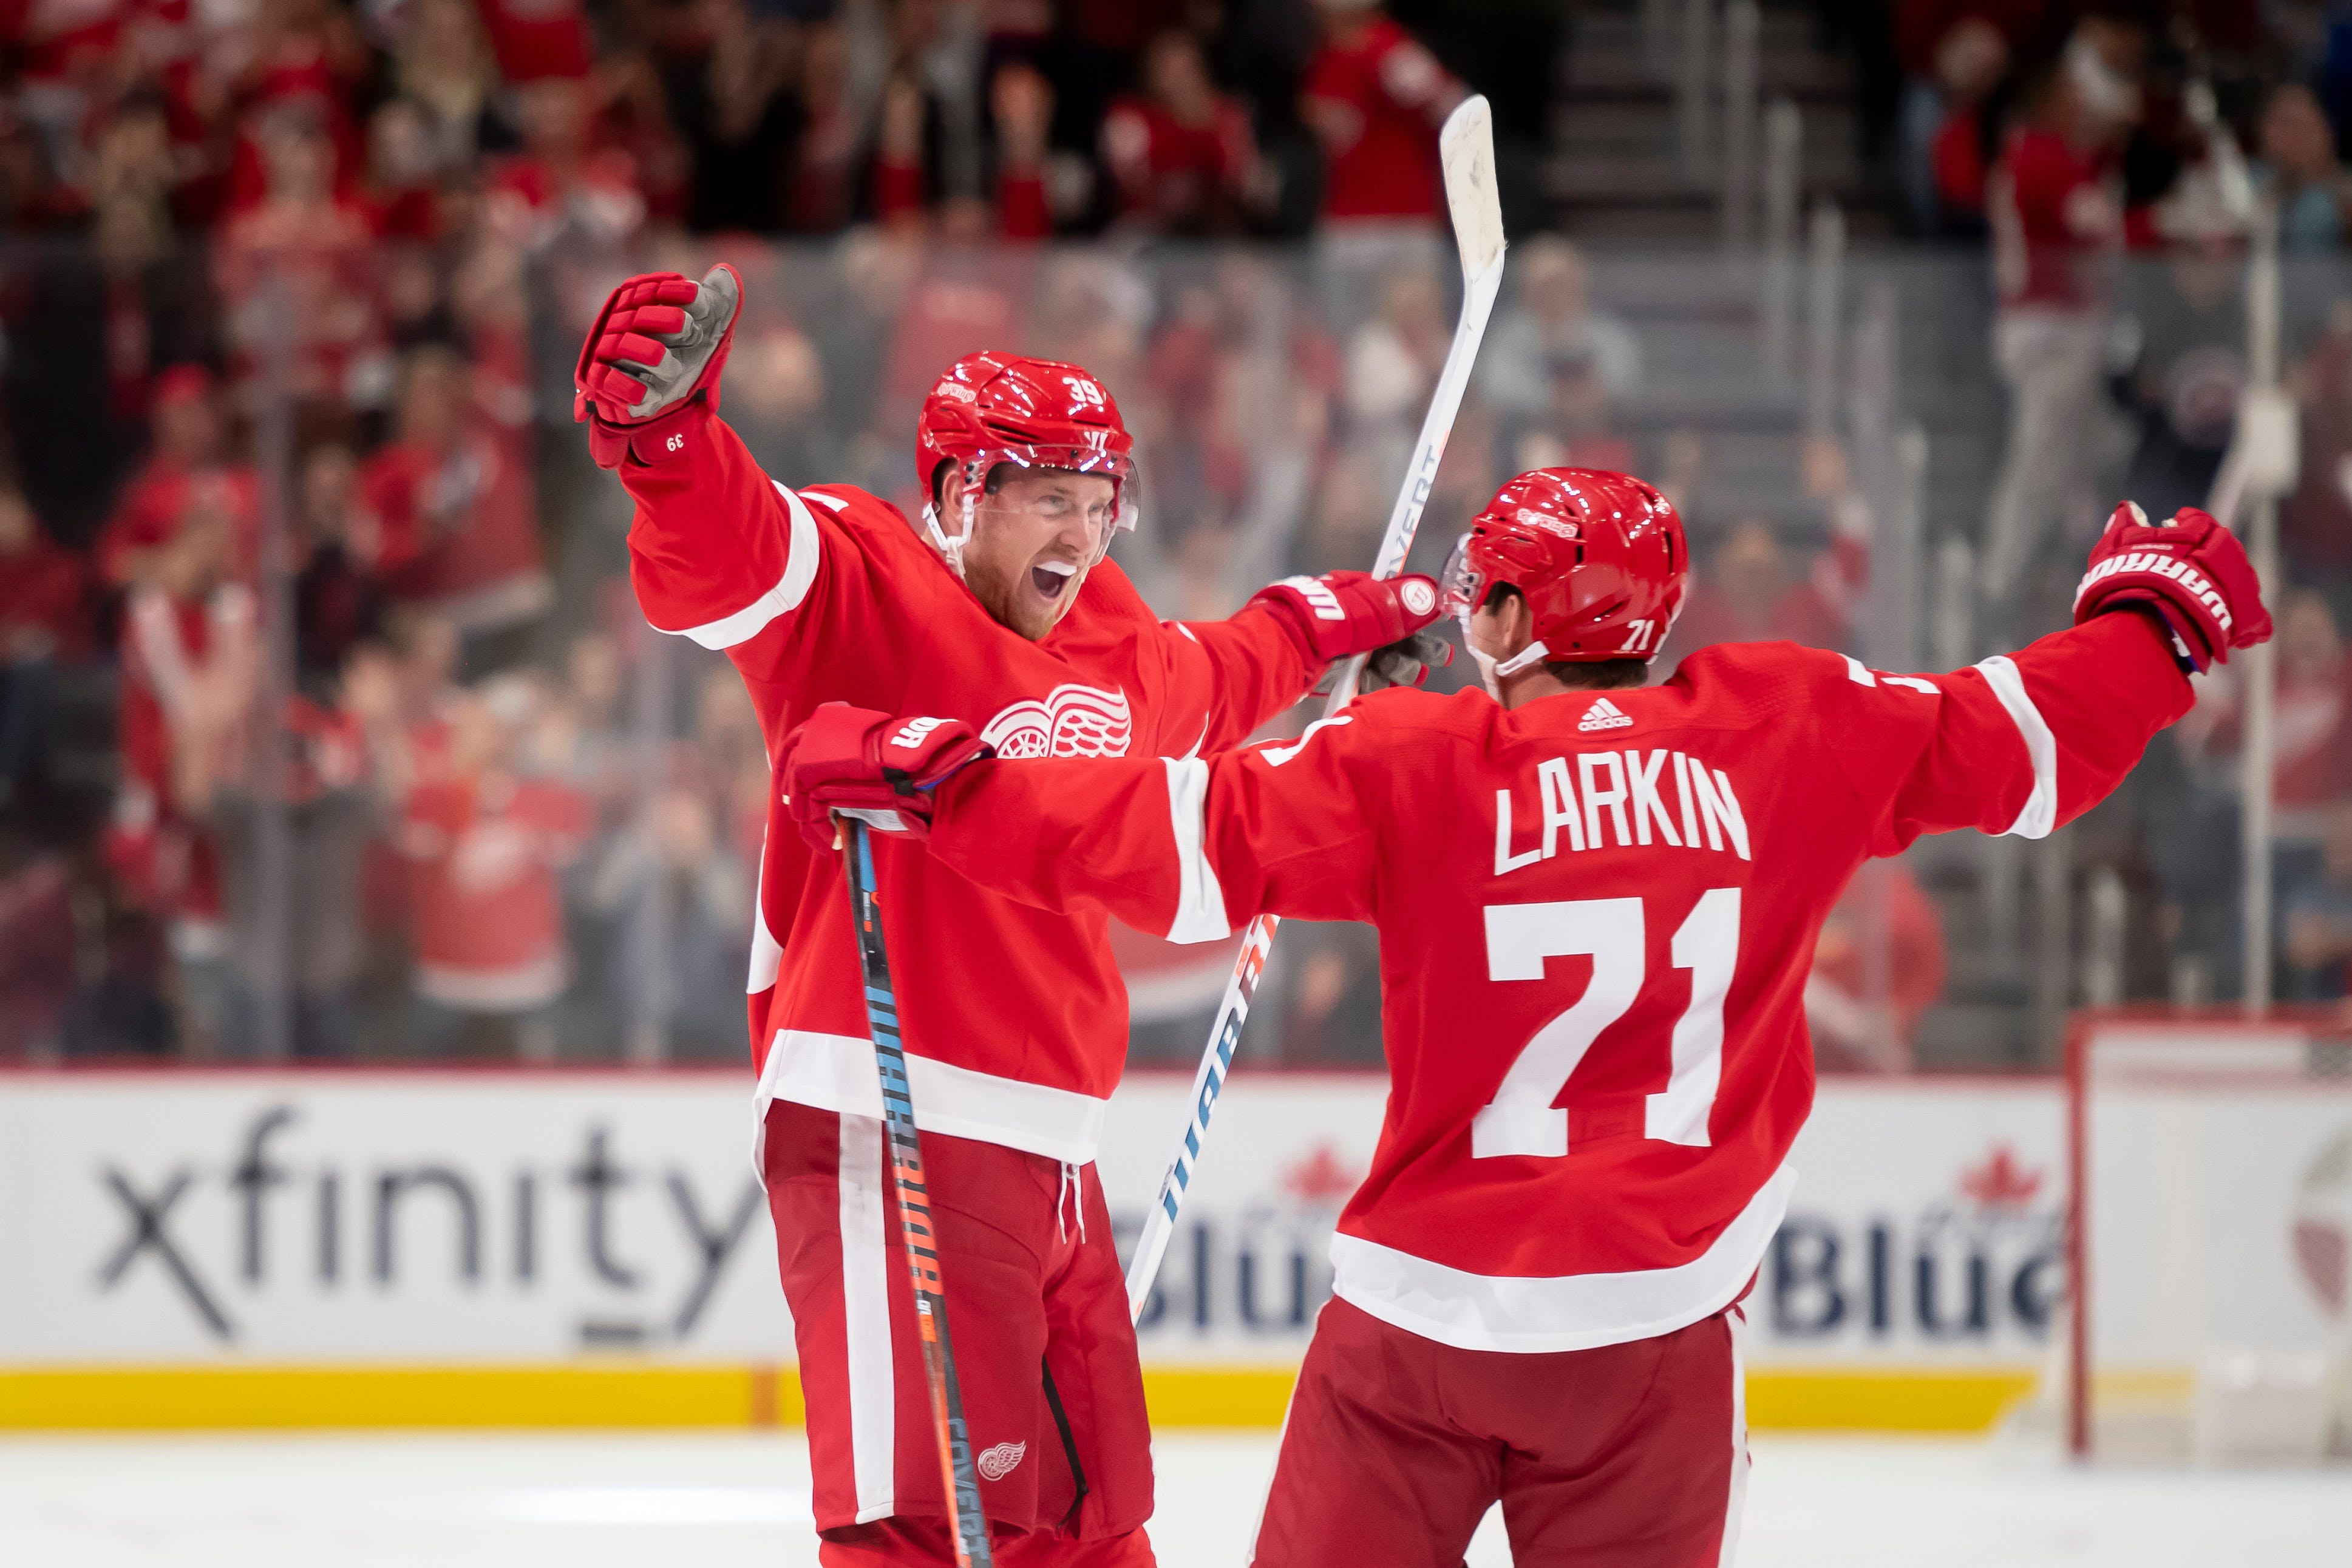 Detroit right wing Anthony Mantha, left, and center Dylan Larkin celebrate Mantha's fourth goal of the game in the third period during the Red Wings home opener at Little Caesars Arena, October 6, 2019.  Mantha scored all of Detroit's goals in the 4-3 win over Dallas